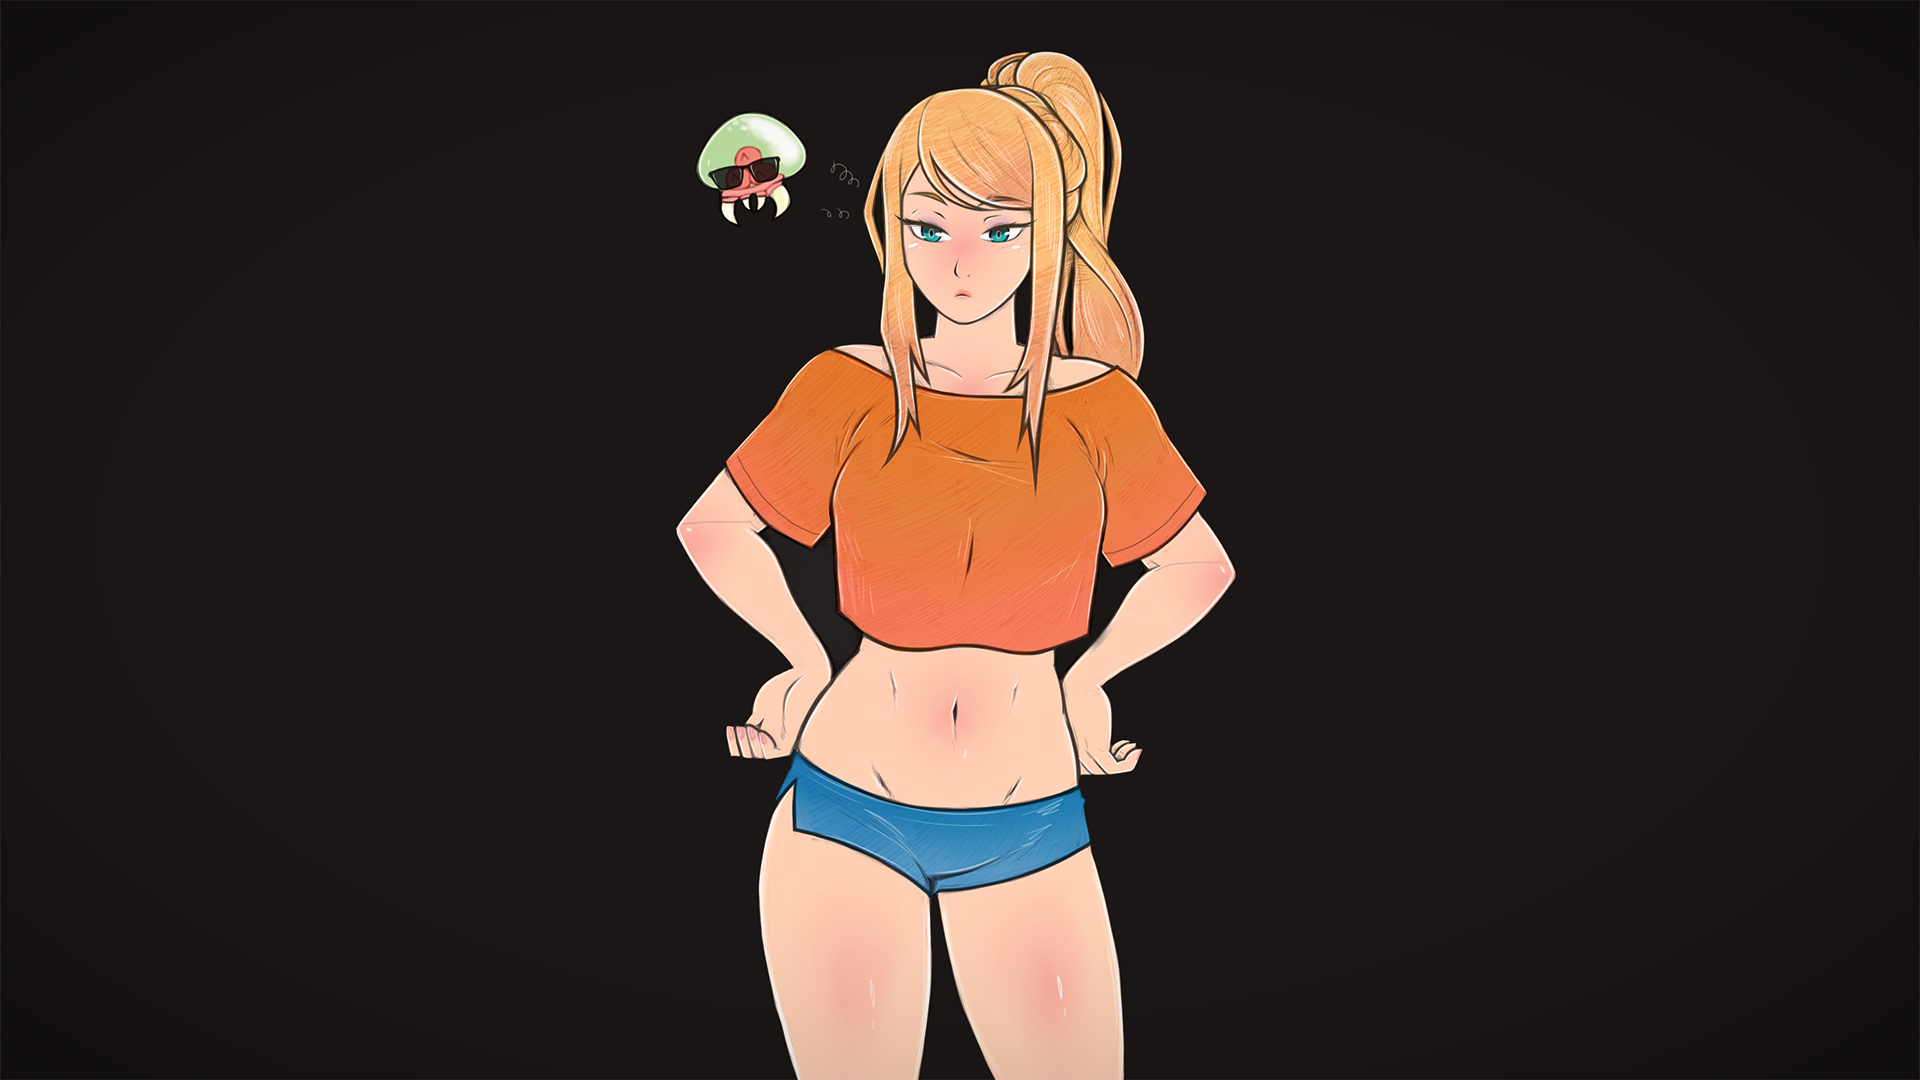 Anime 1920x1080 video games video game girls long hair ponytail bangs looking at viewer hips blonde blunt bangs shirt T-shirt orange t-shirt orange shirts shorts jean shorts belly belly button bare midriff hands on hips collarbone defined collarbone thighs black background simple background blue eyes Nintendo Samus Aran Metroid sunglasses women with shades sidelocks denim skirt